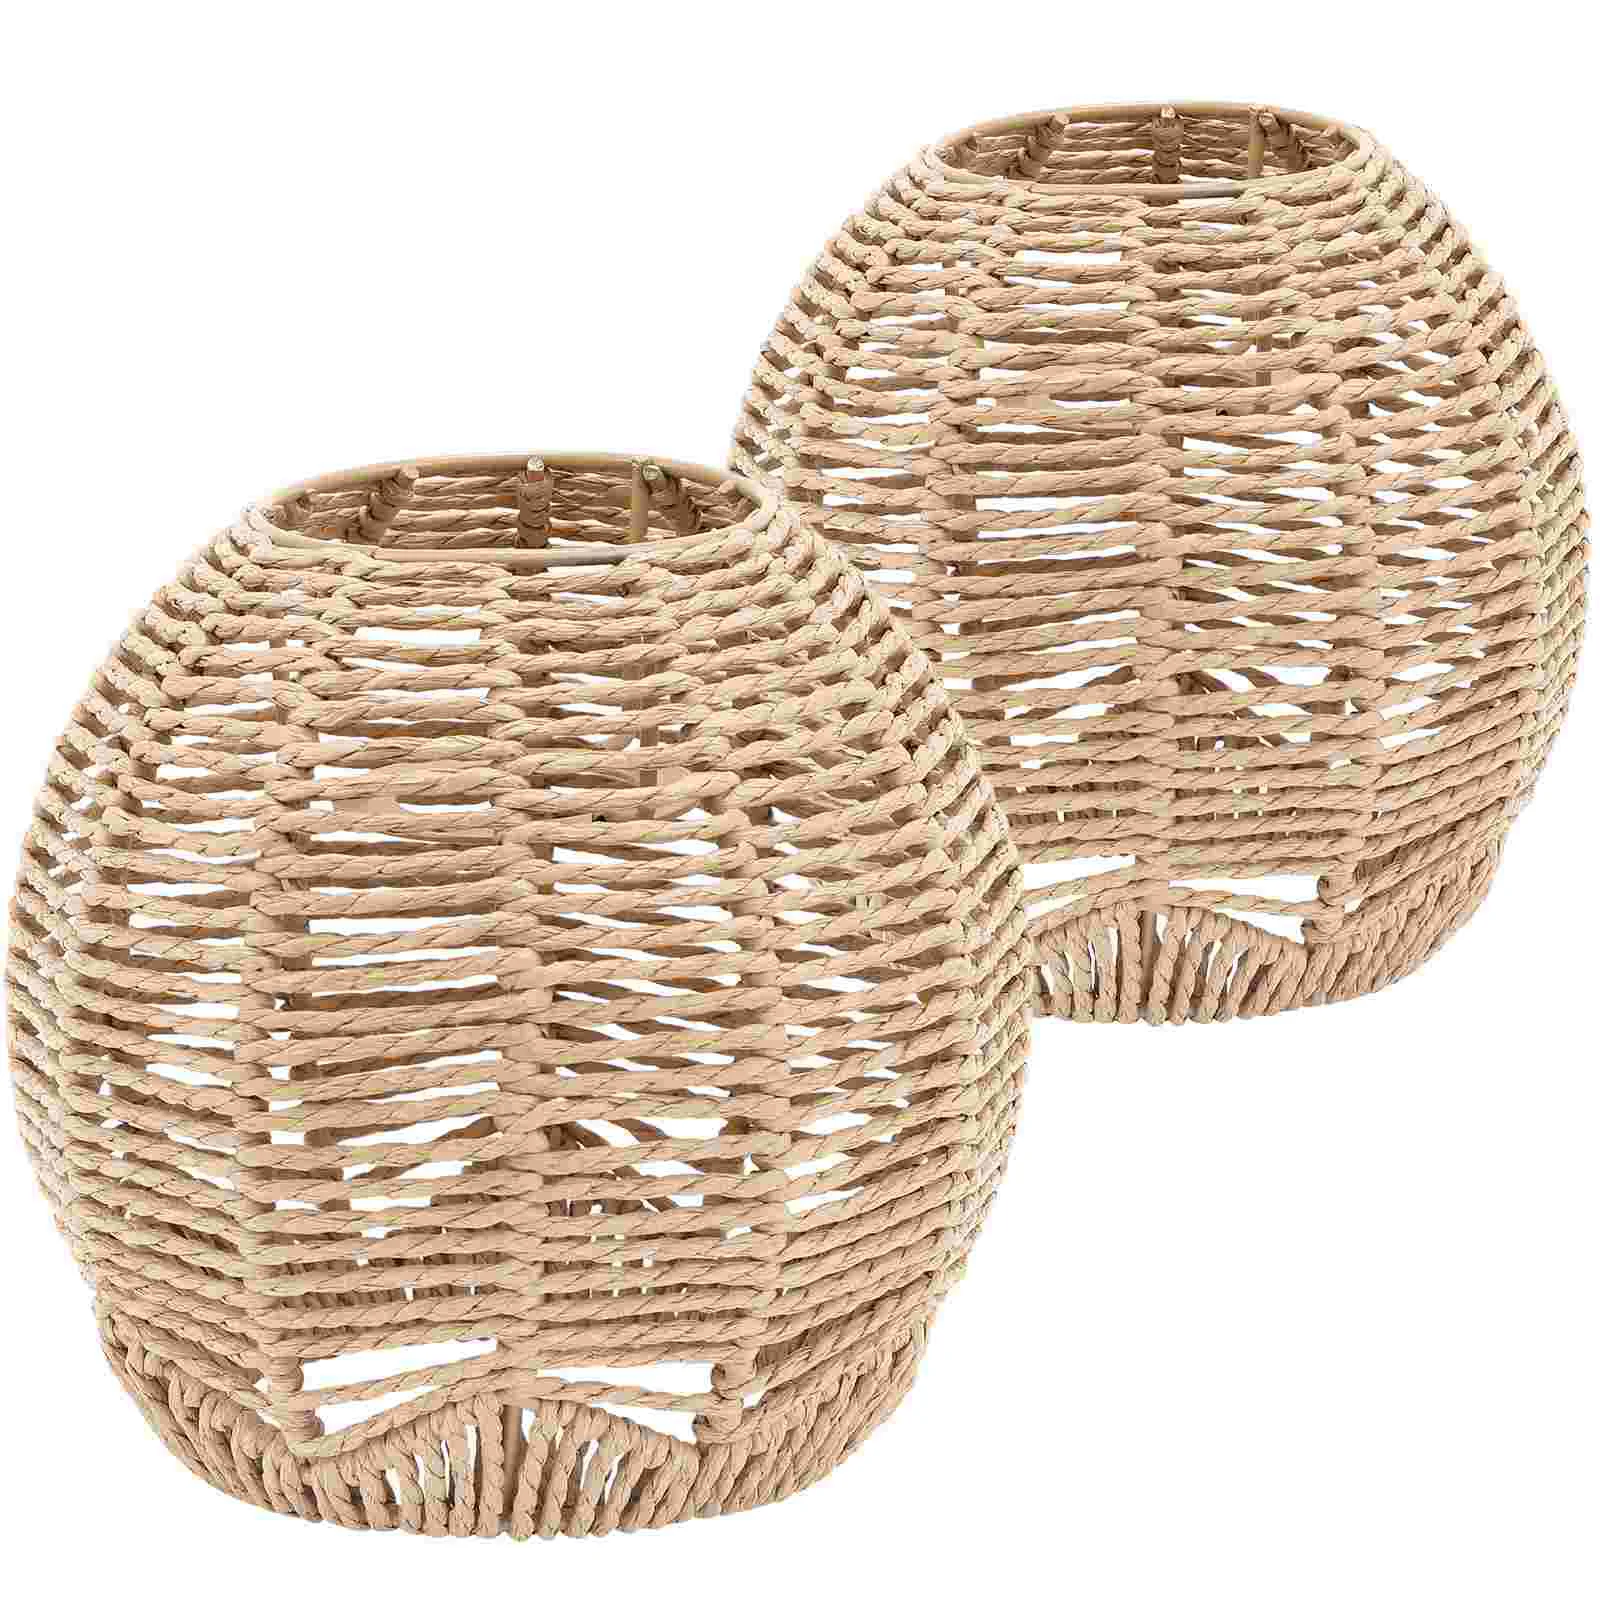 

Chandelier Lamp Shade Rattan Basket Lampshade Pendant Replacement Light Shades Small Weave Bulb Cage Guard Wicker suspension